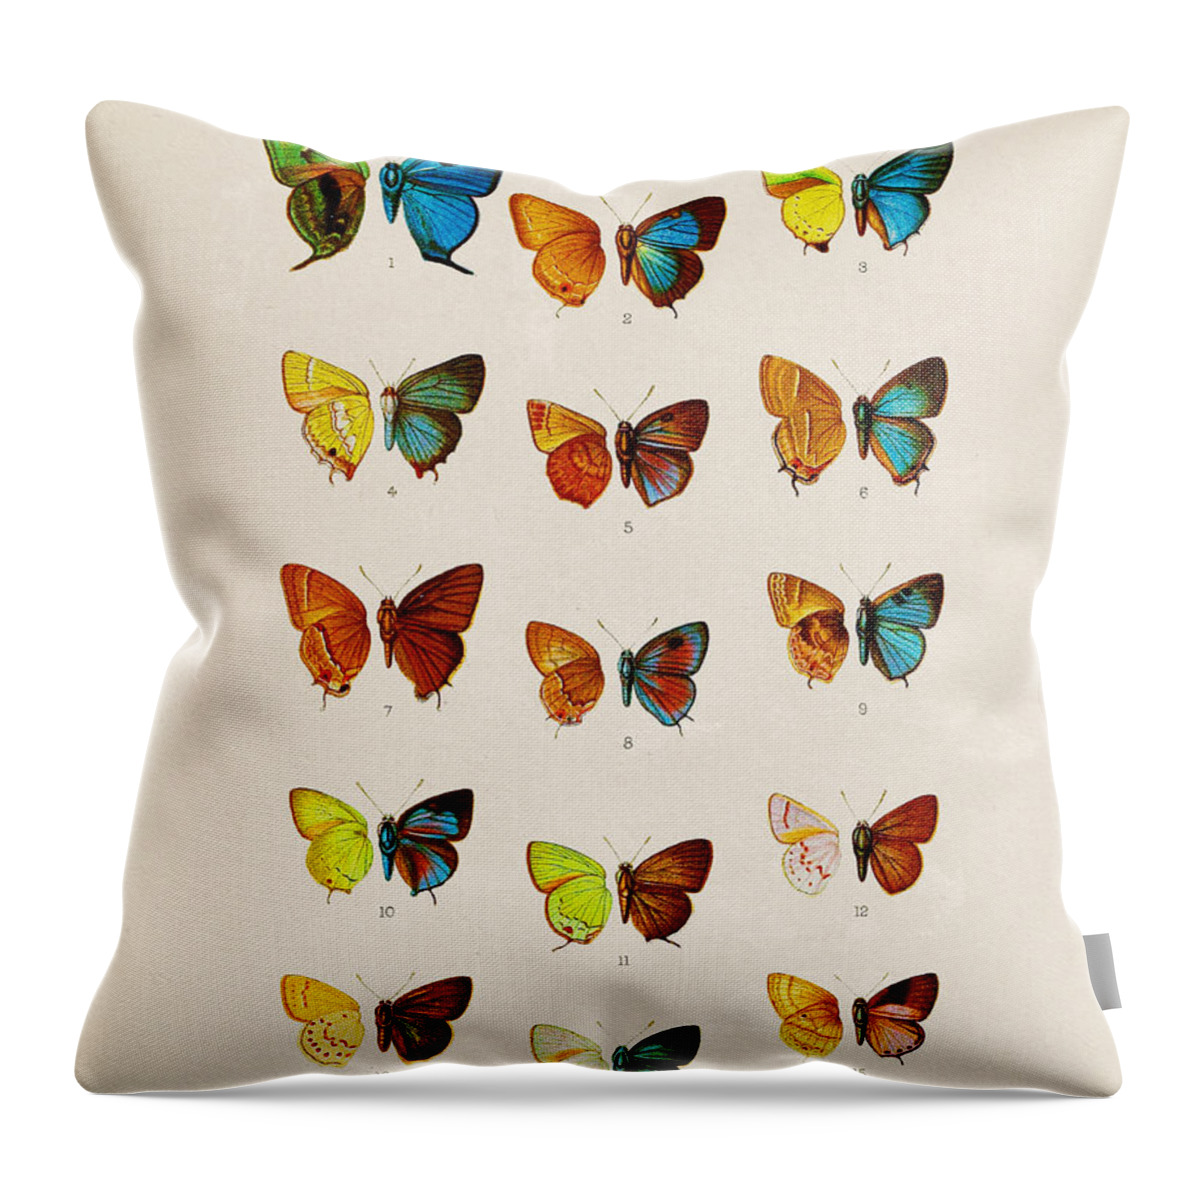 Butterfly Throw Pillow featuring the drawing Butterfly Plate by Pati Photography